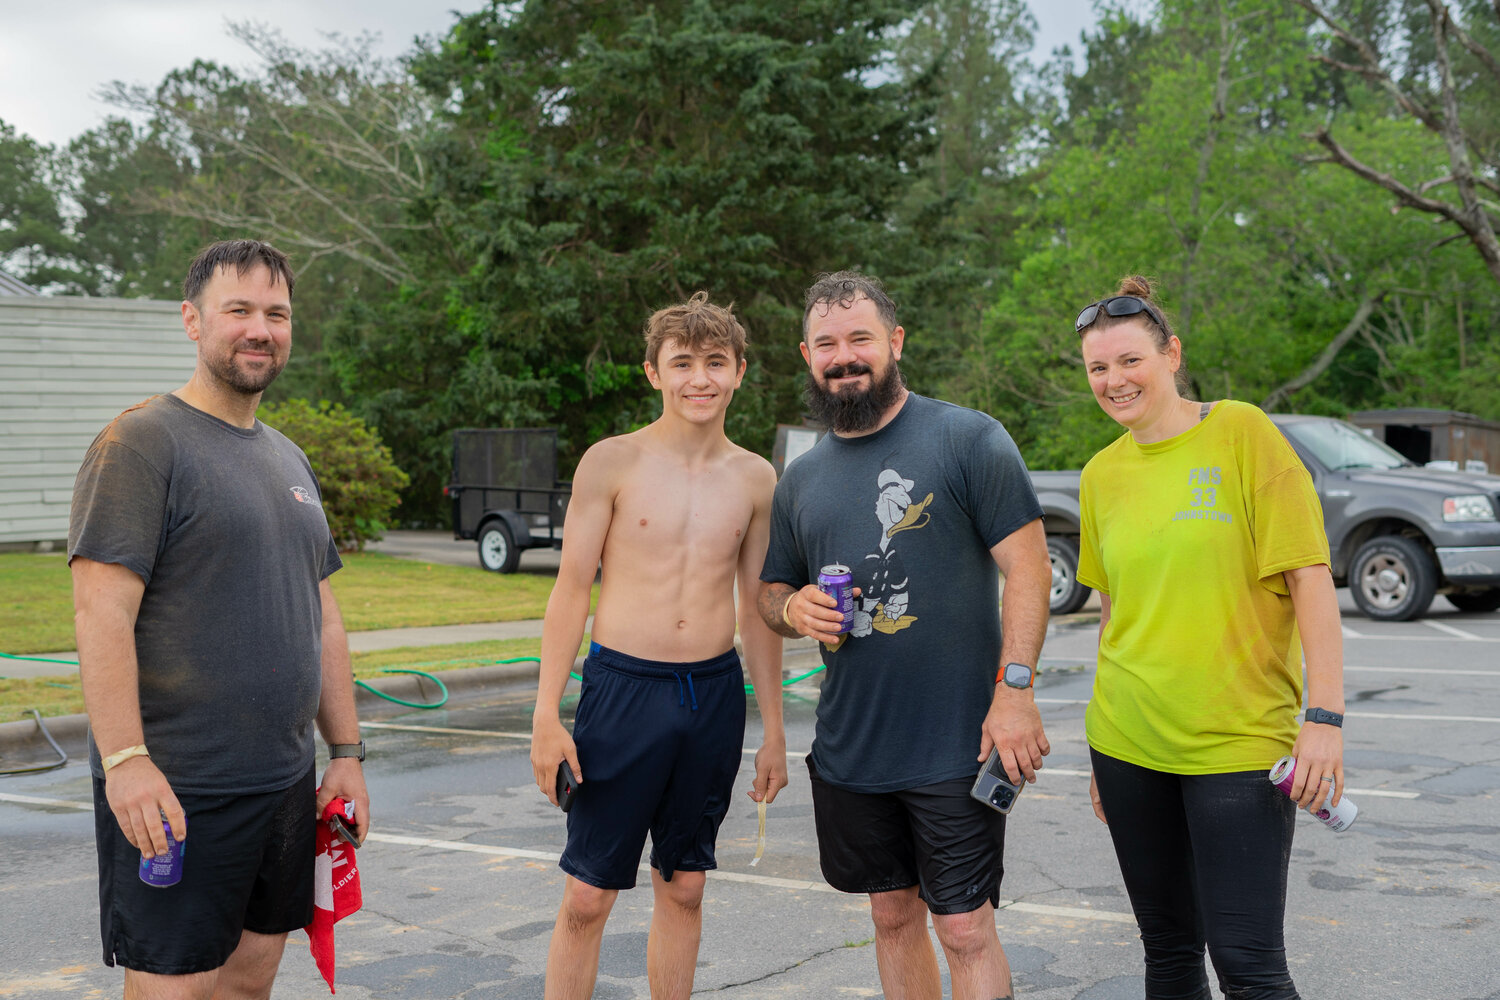 Jon Szopinski, Colton Hubbard, Sam Hubbard and Christy Jackson turned out for the Mud Run at Fort Bragg.